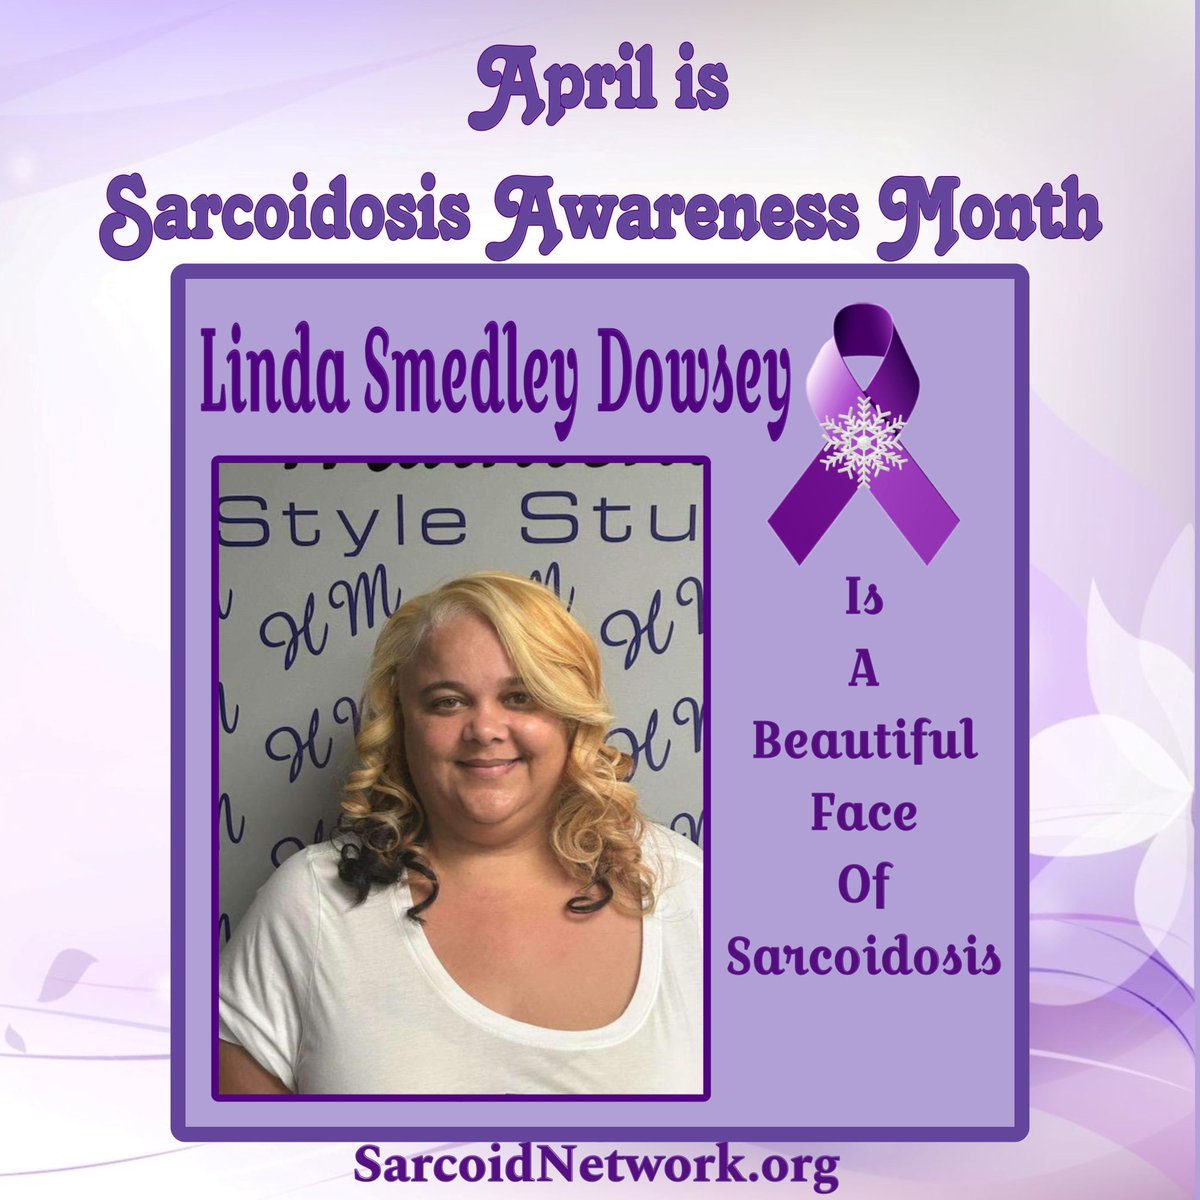 This is our Sarcoidosis Sister Linda Smedley Dowsey and she is a Beautiful Face of Sarcoidosis!💜 #Sarcoidosis #raredisease #patientadvocate #sarcoidosisadvocate #beautifulfacesofsarcoidosis #sarcoidosisawarenessmonth